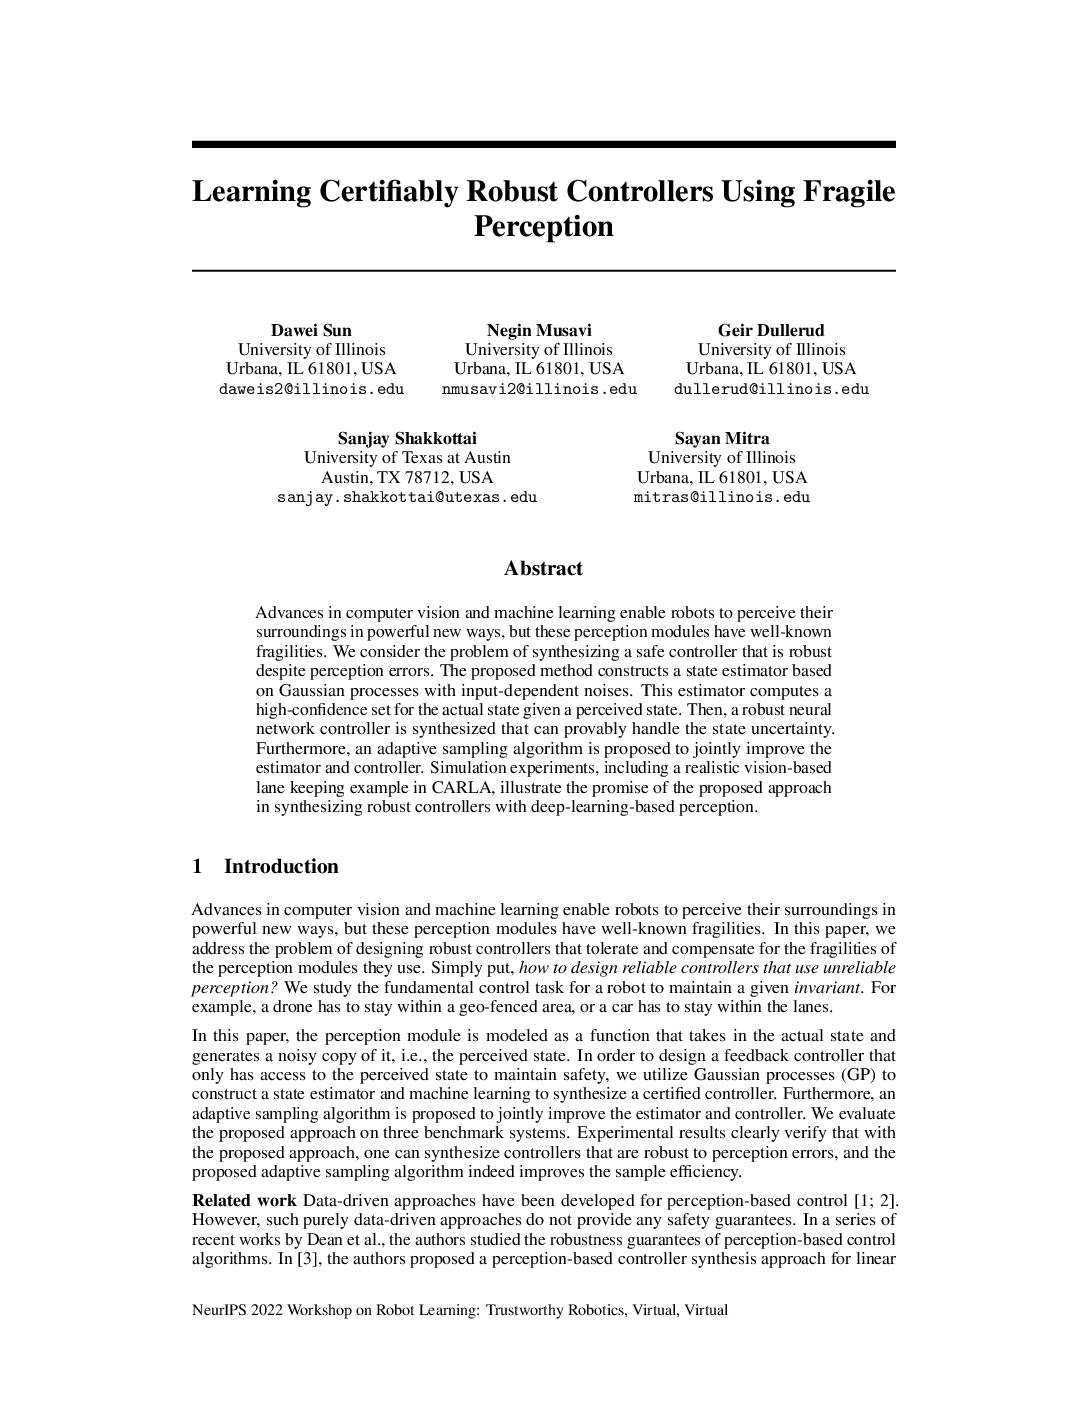 Learning Certifiably Robust Controllers Using Fragile Perception